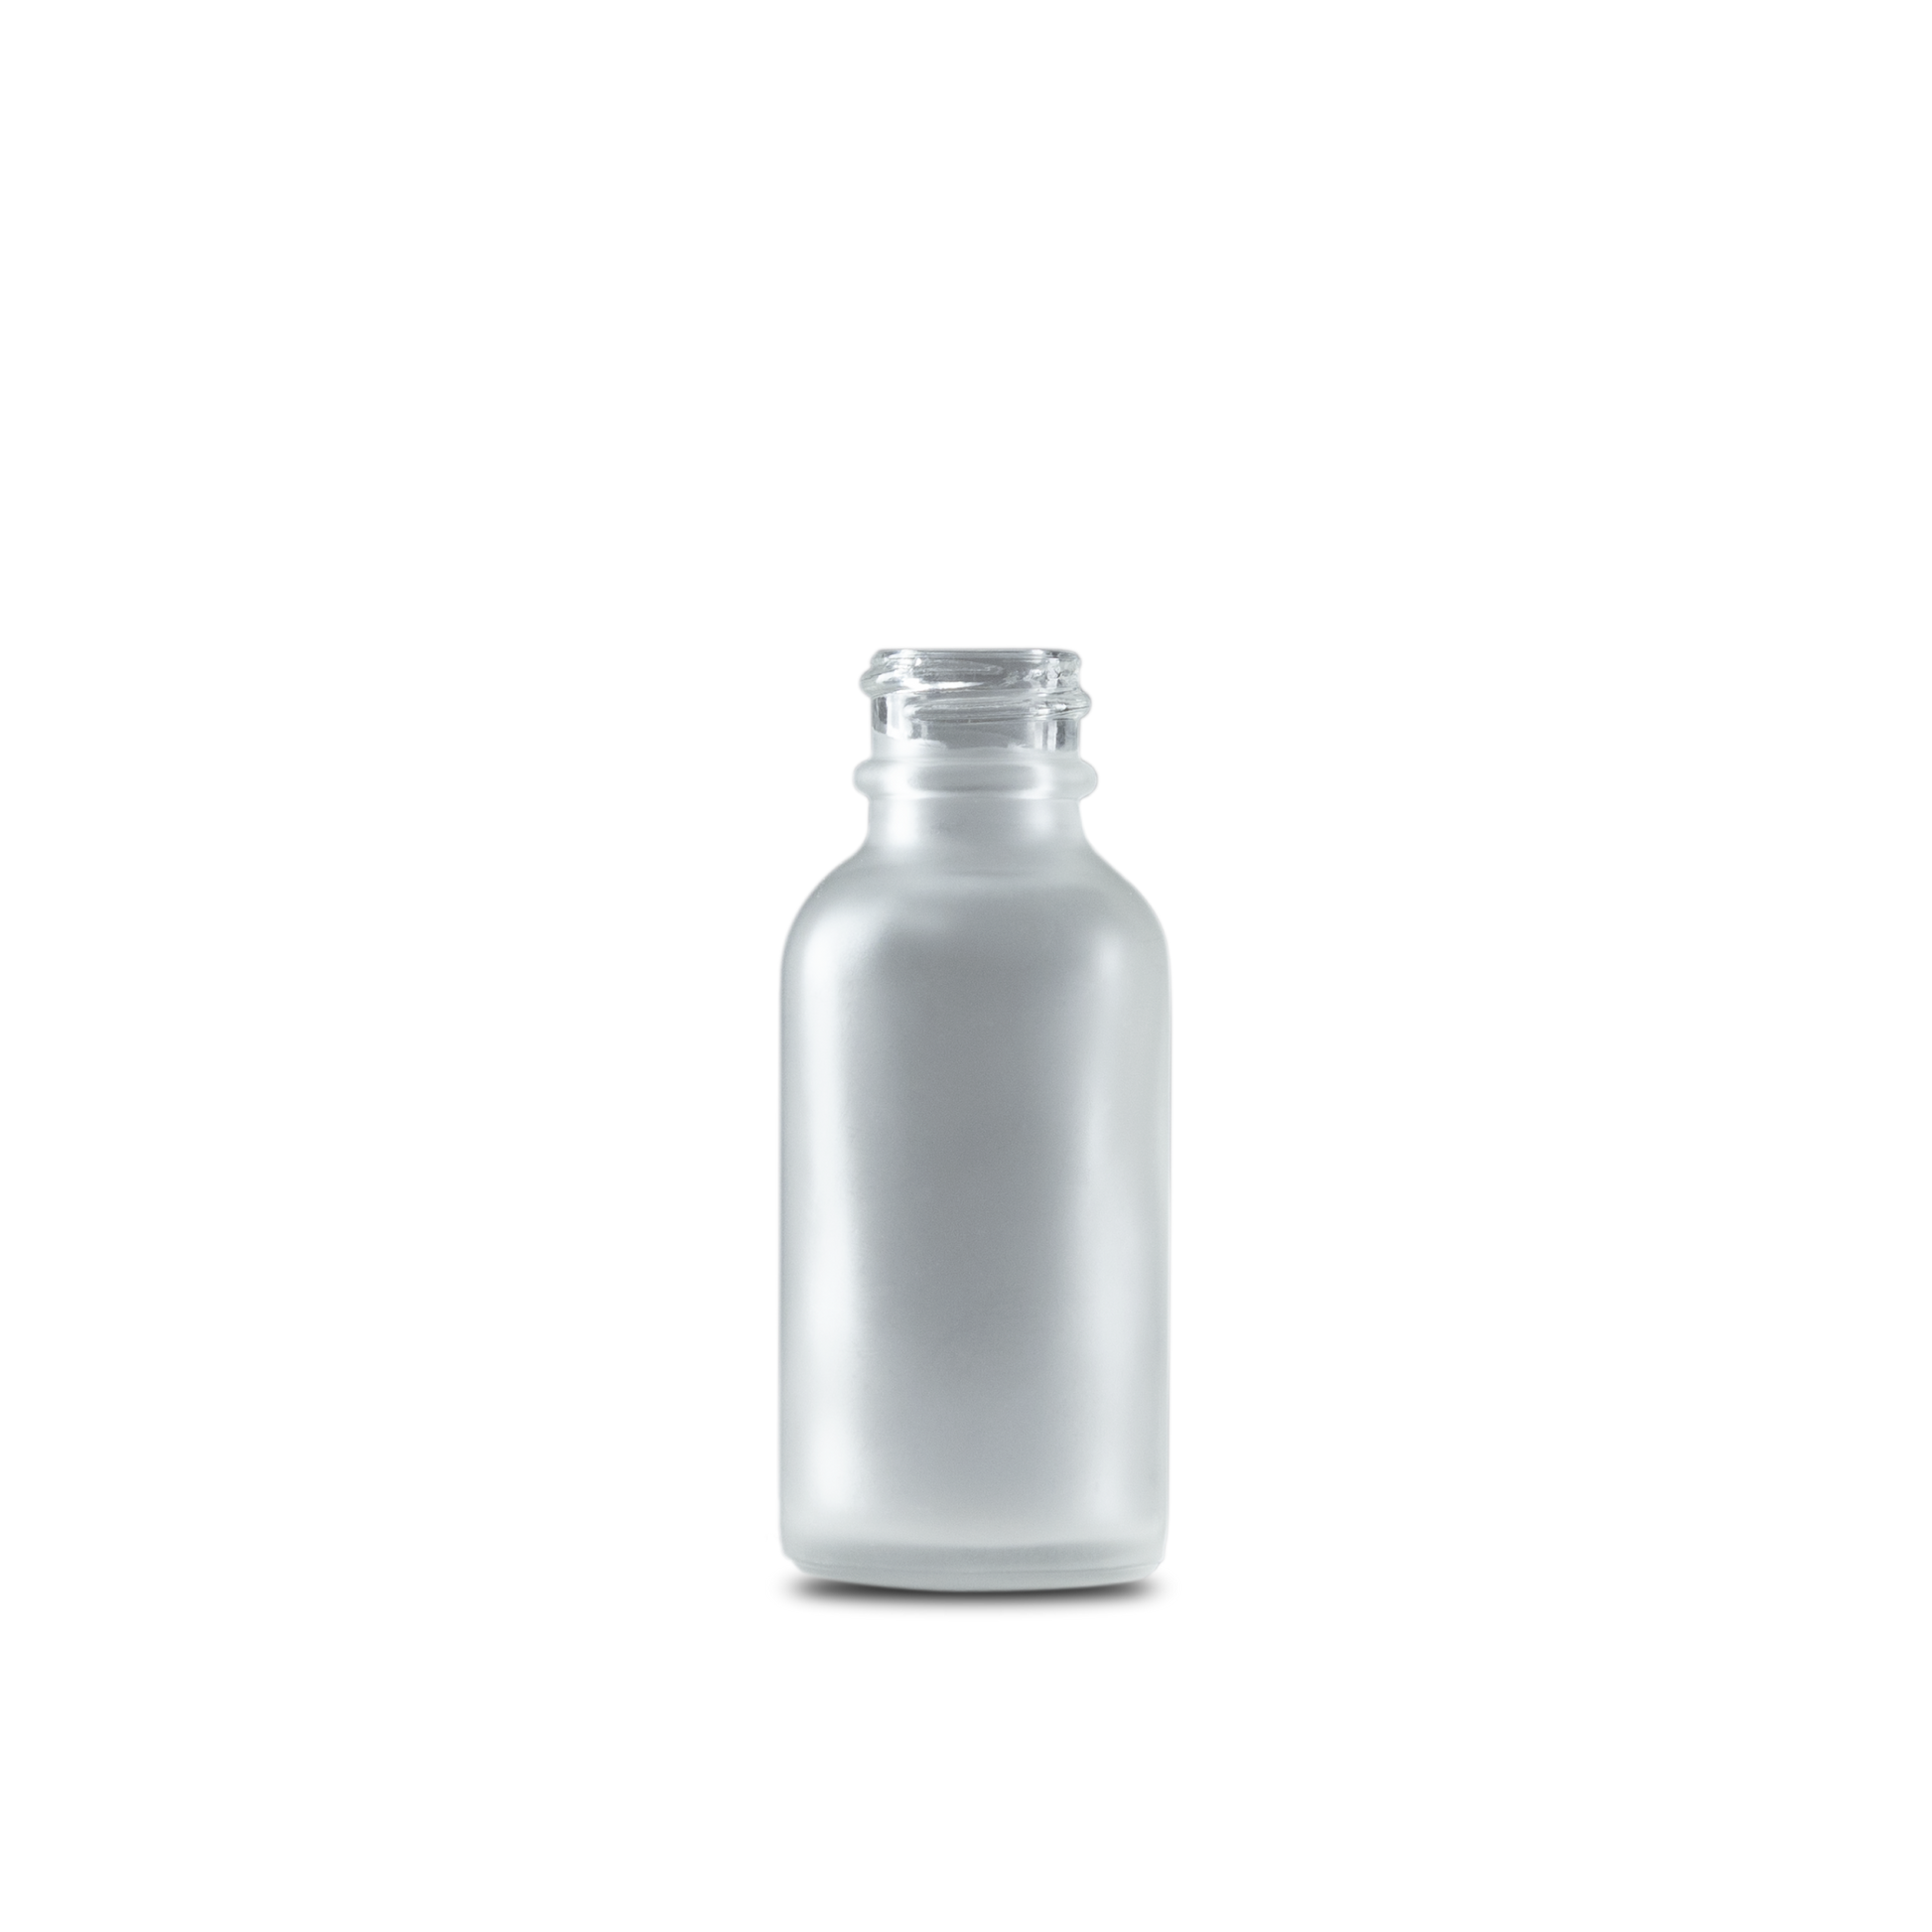 1oz clear frosted bottles are the most popular types of glass bottles for storing, packaging, and displaying all sorts of products. 